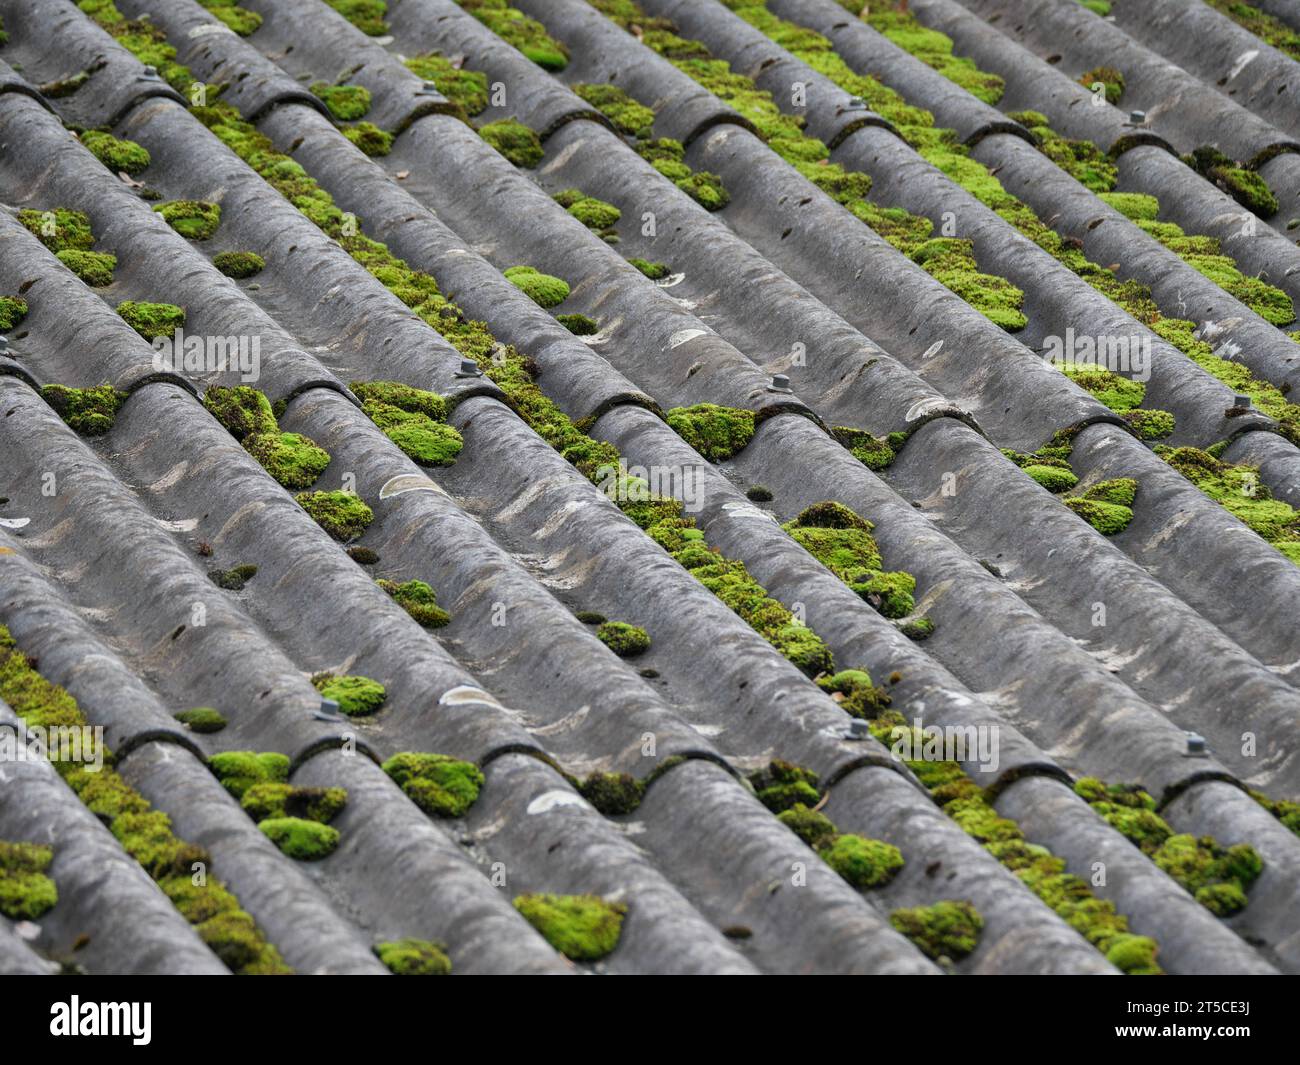 Green moss cushion growing on a roof made of gray corrugated asbestos sheets Stock Photo